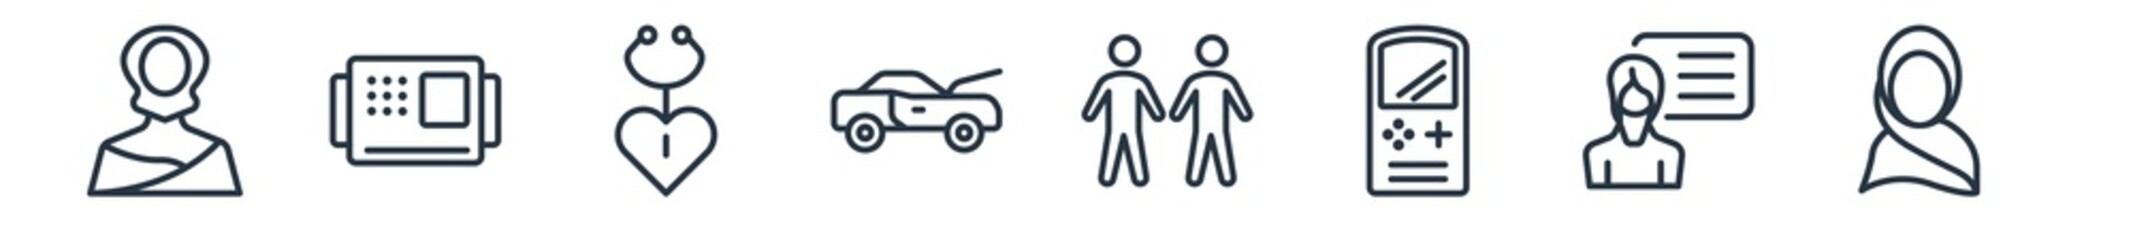 linear set of user outline icons. line vector icons such as malaysian, kasa, checkup, hood open, gay couple, muslim woman vector illustration.